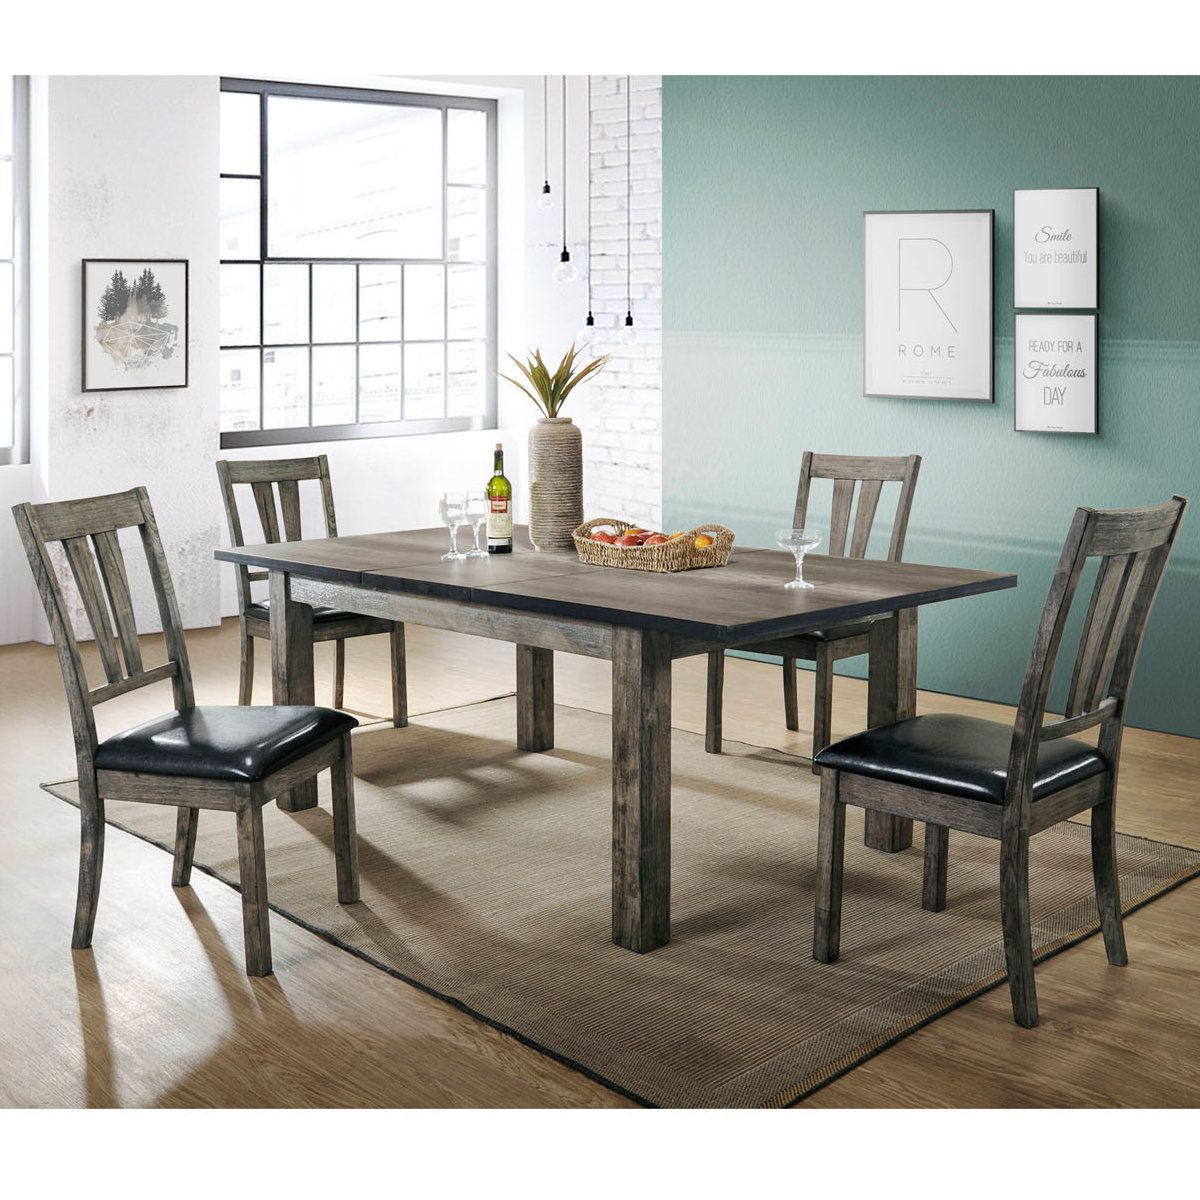 Ebay Intended For Tejeda 5 Piece Dining Sets (View 7 of 20)